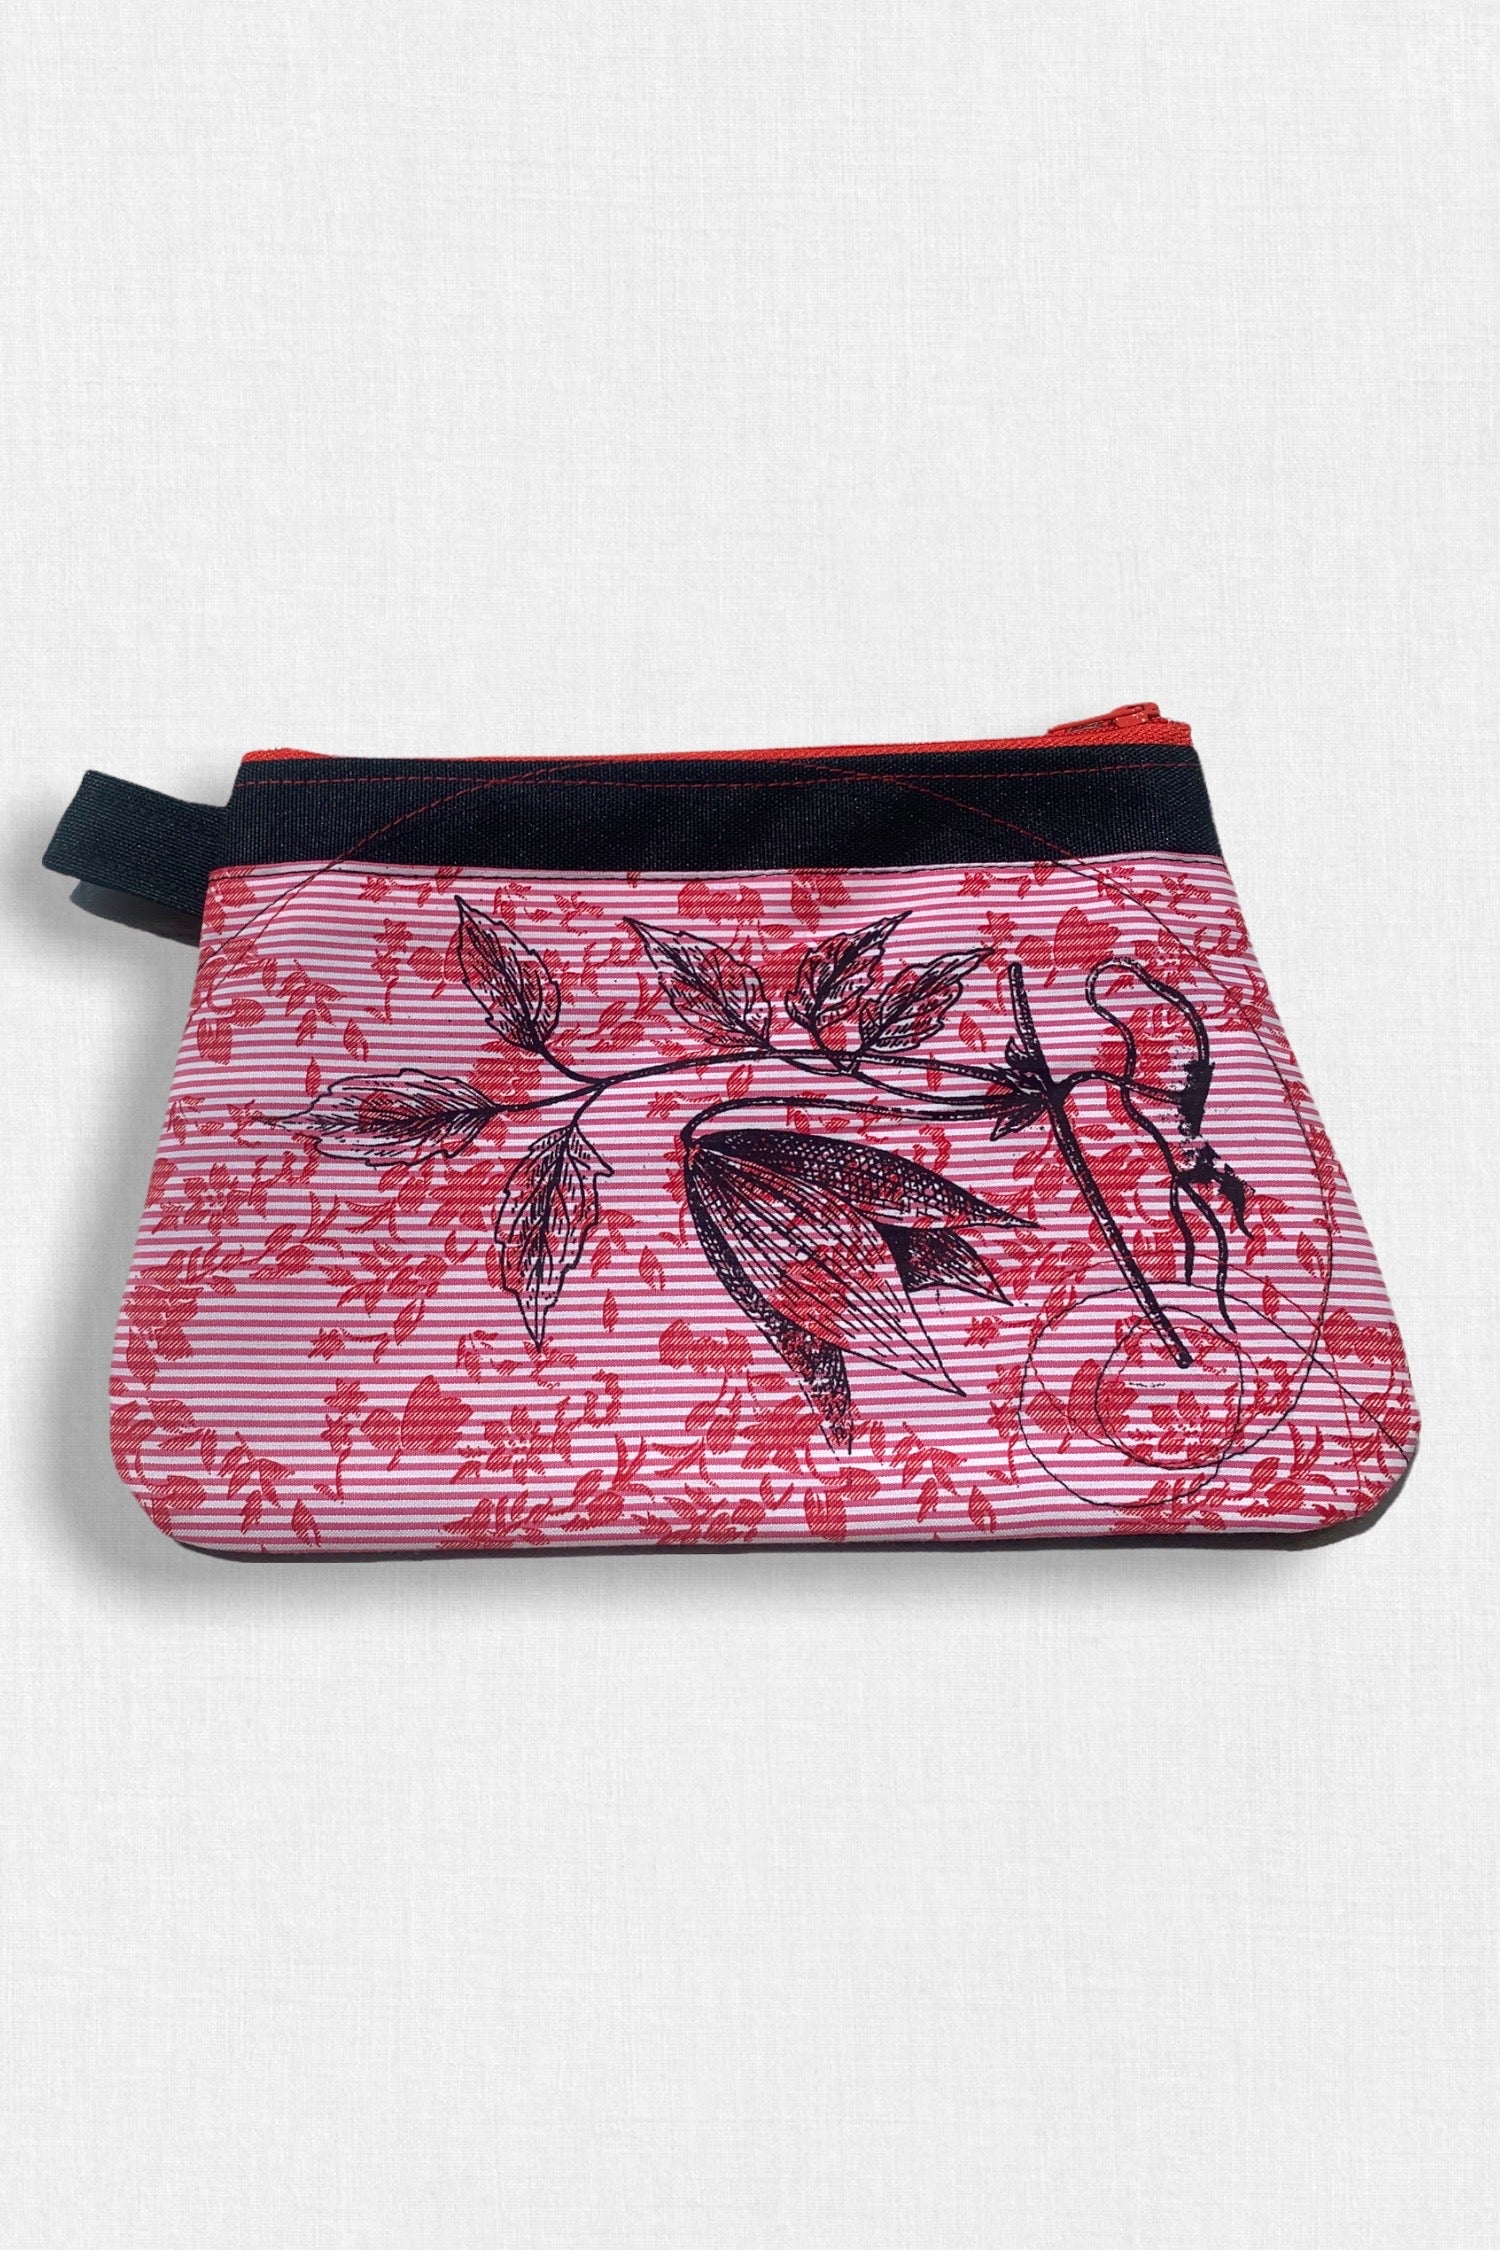 Cynthia DM water resistant pouch - Many colour options